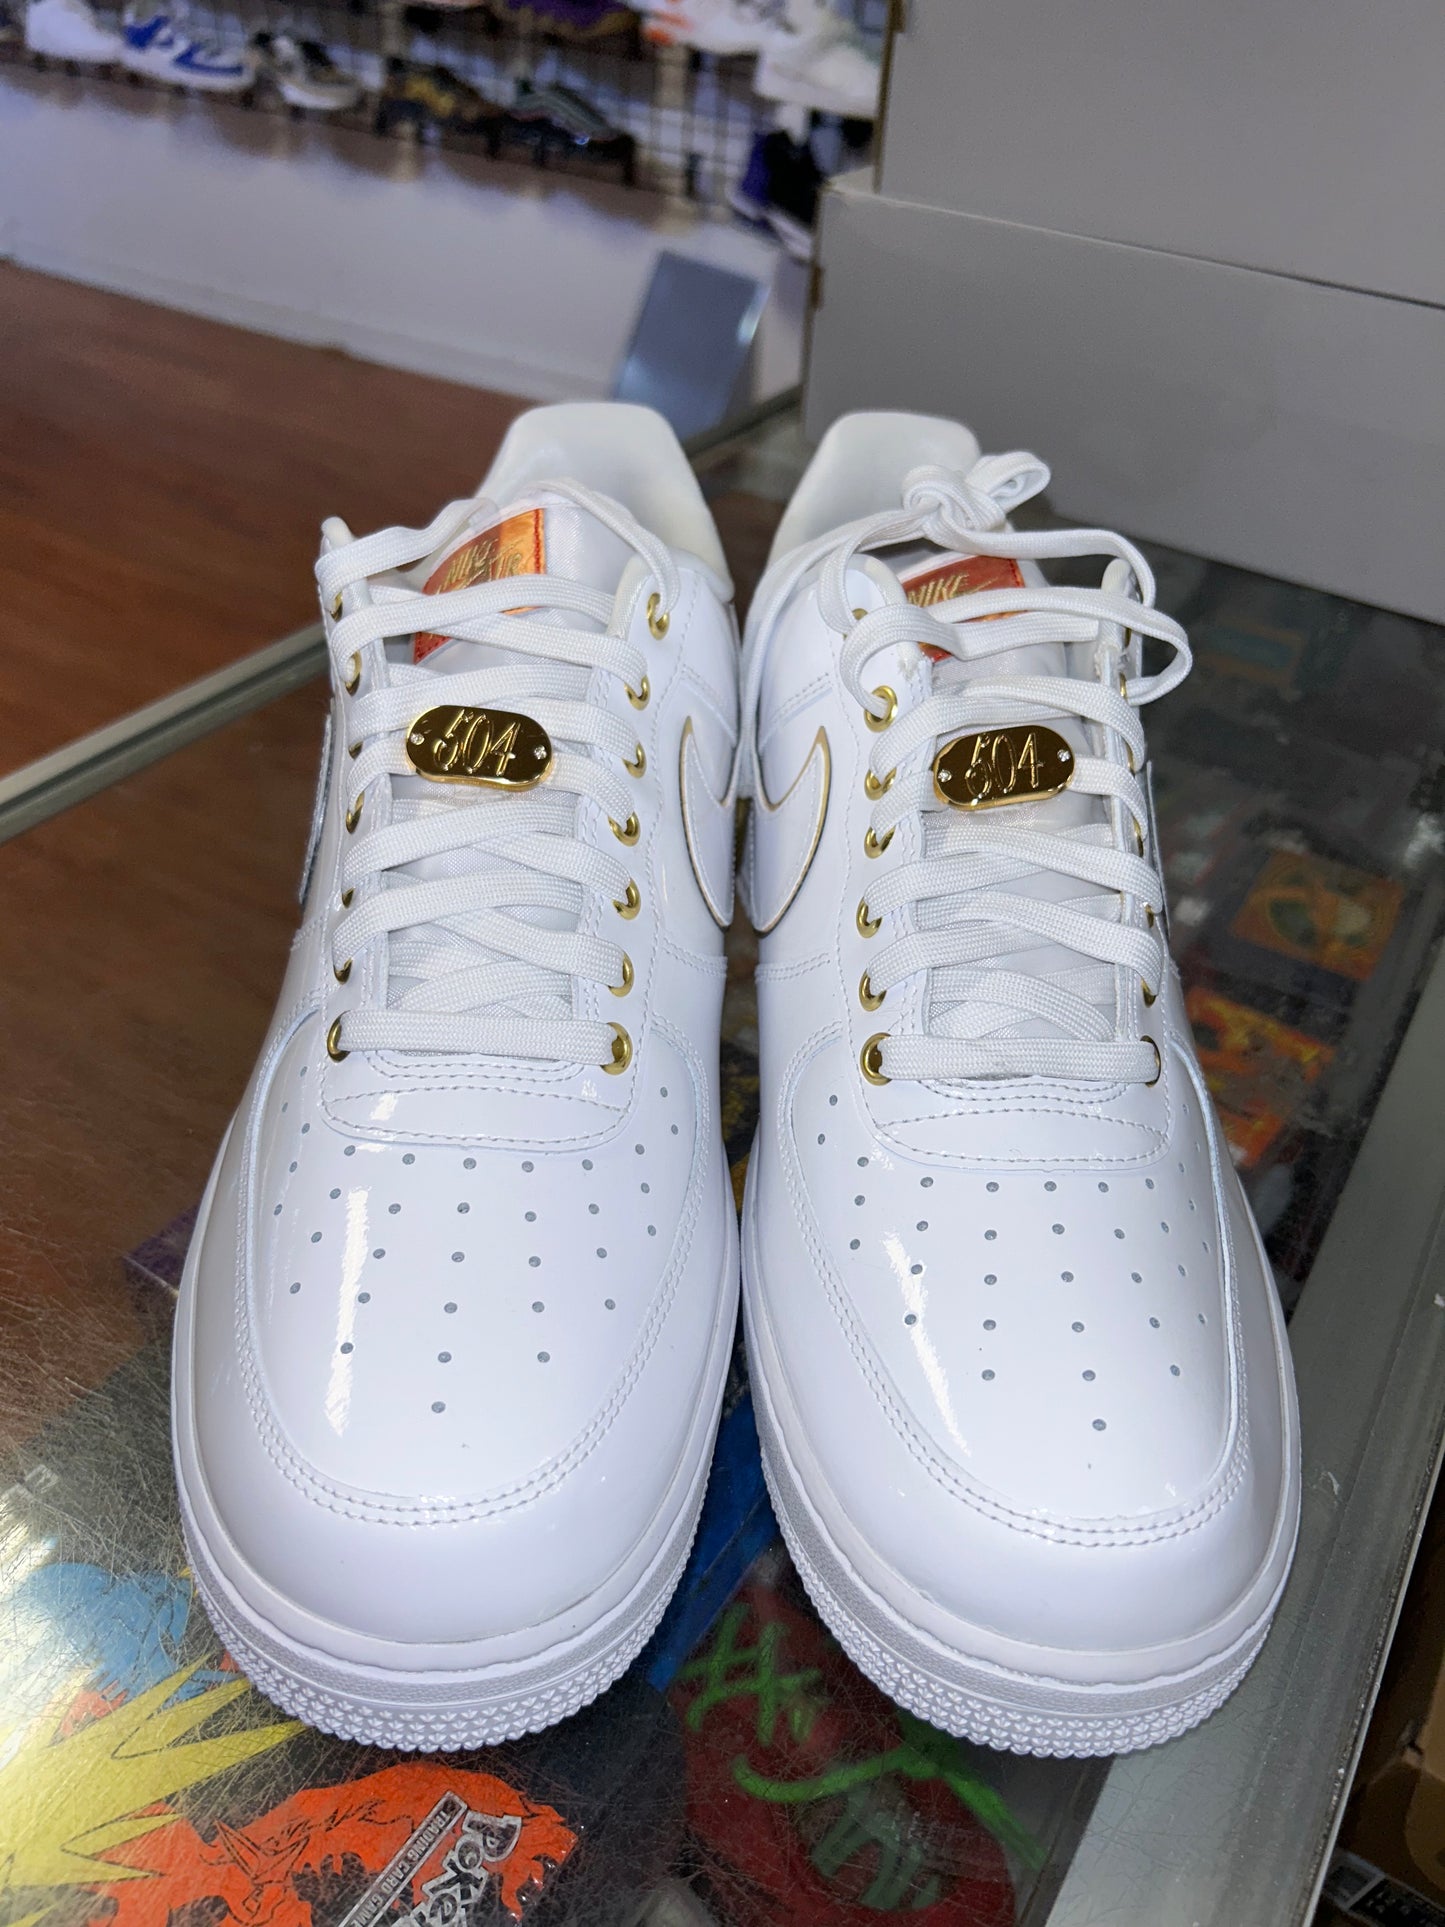 Size 12 Air Force 1 Low "NOLA" Brand New (MAMO)